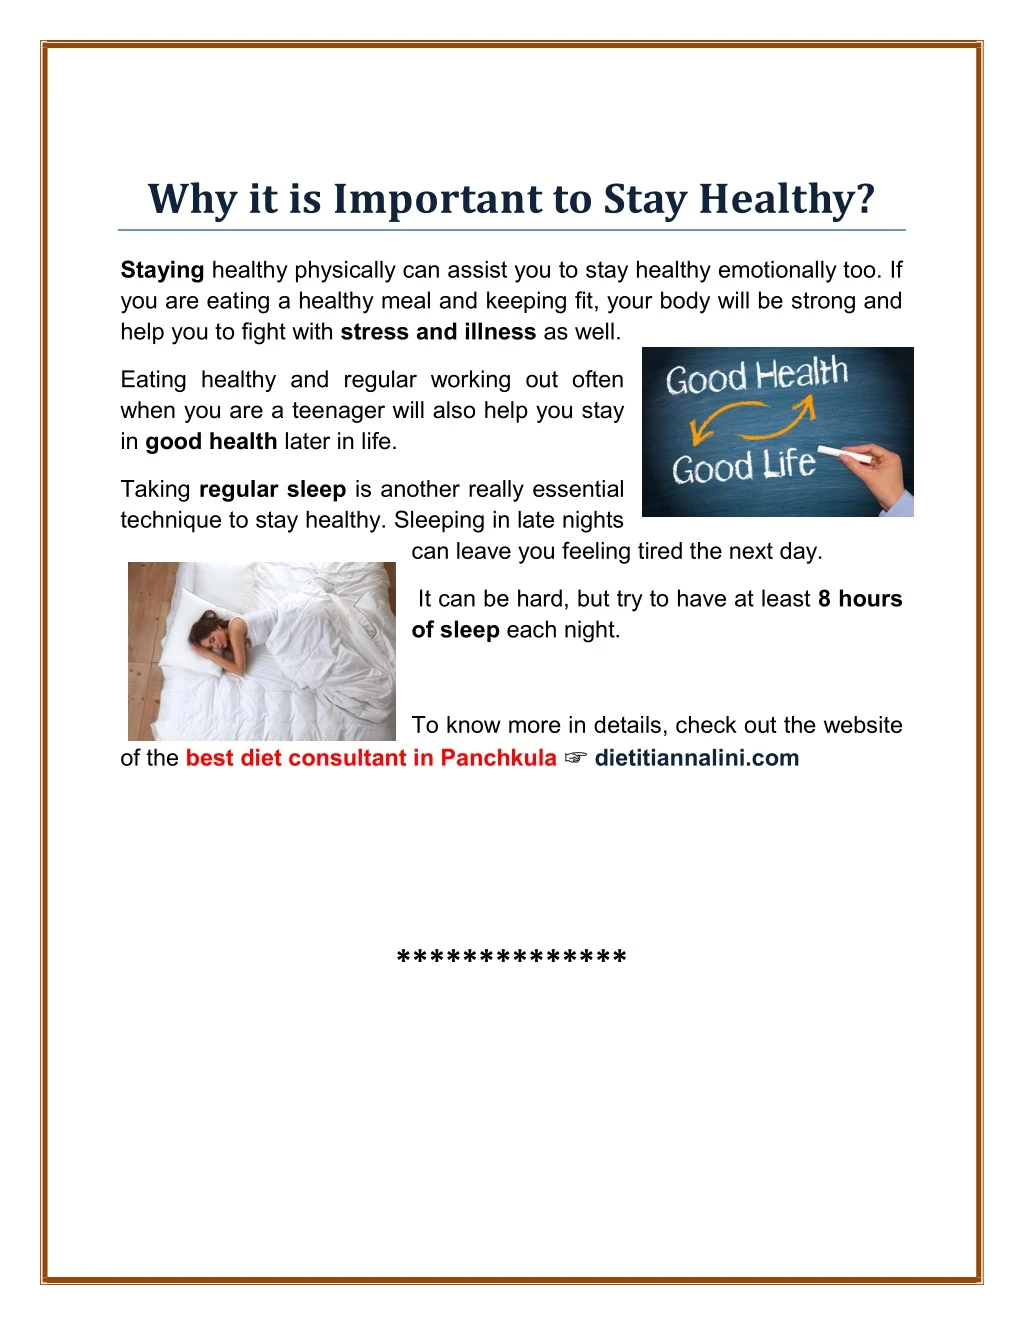 why it is important to stay healthy